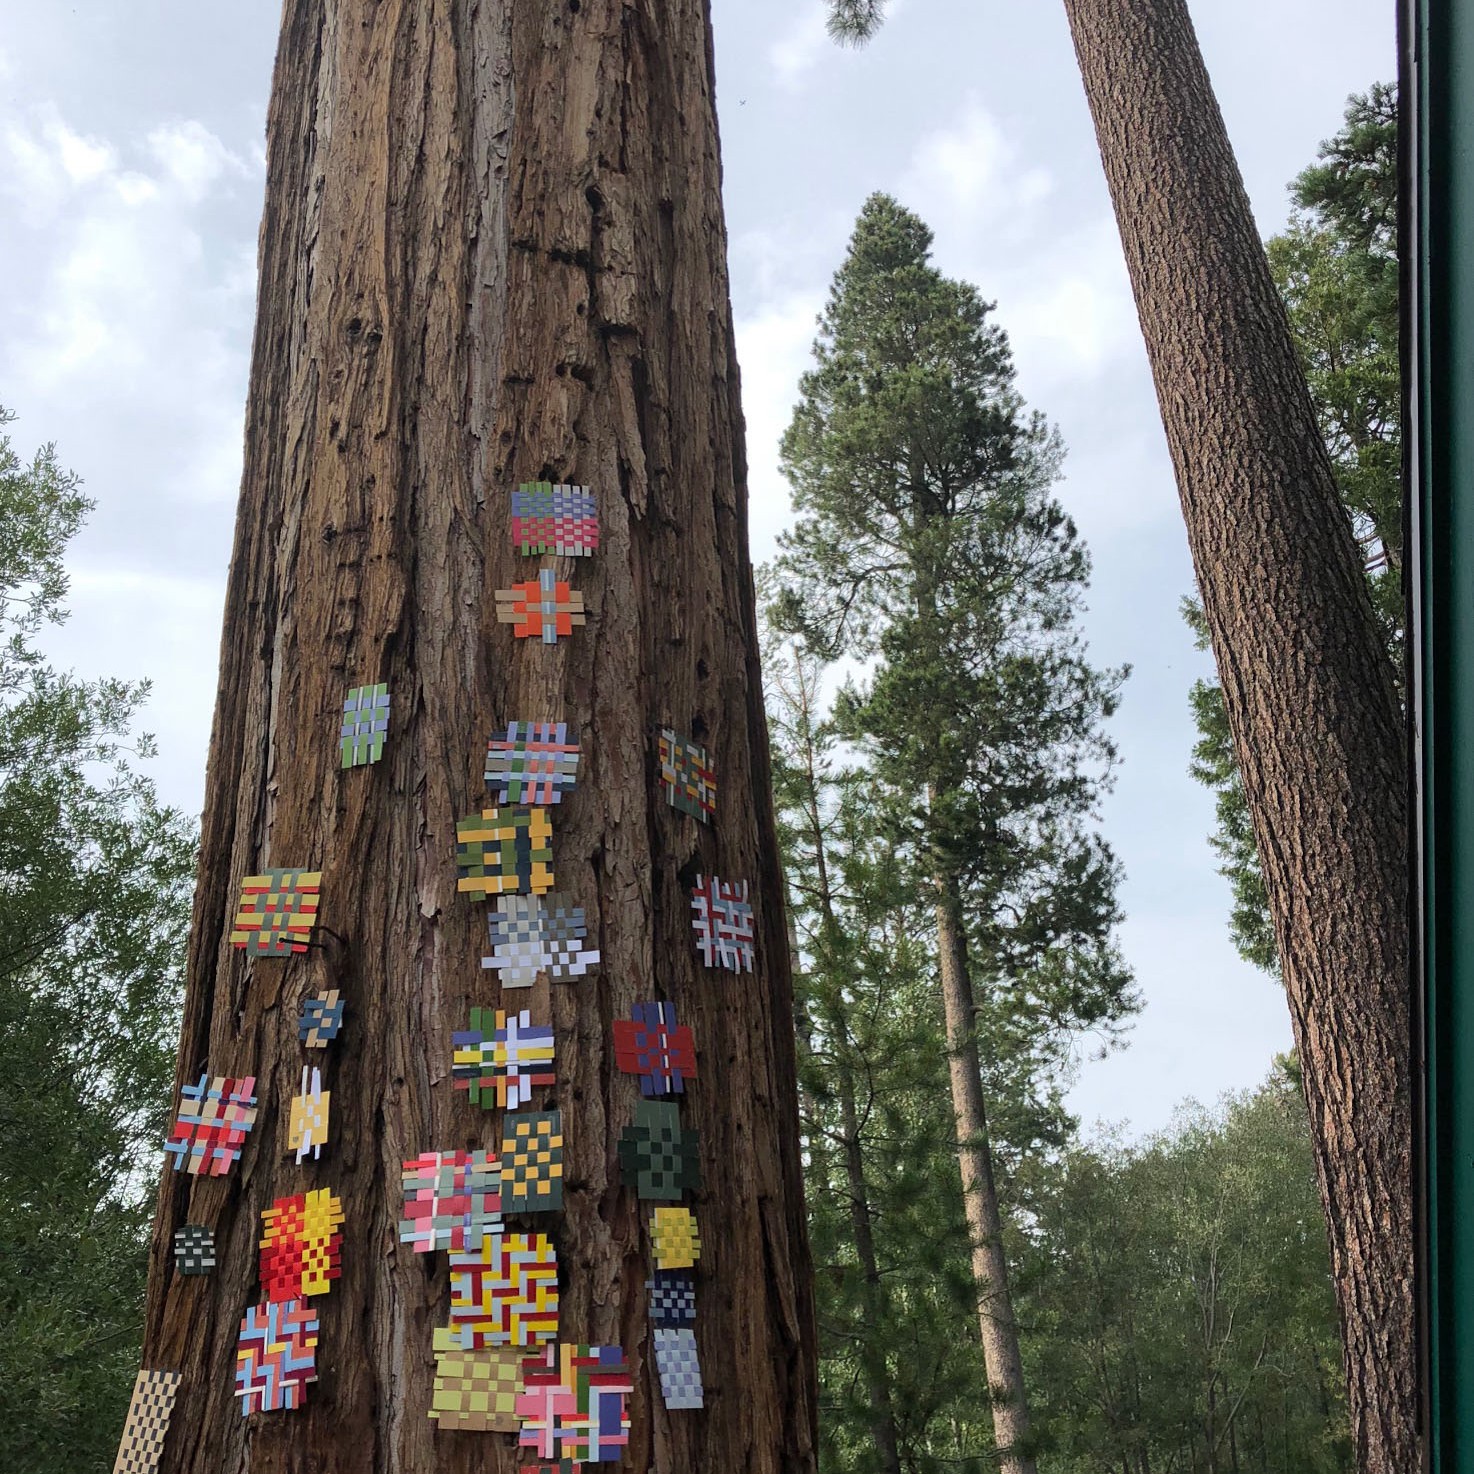 Installation View 1 - 2018 | Found paper on tree | Lake Tahoe, CA